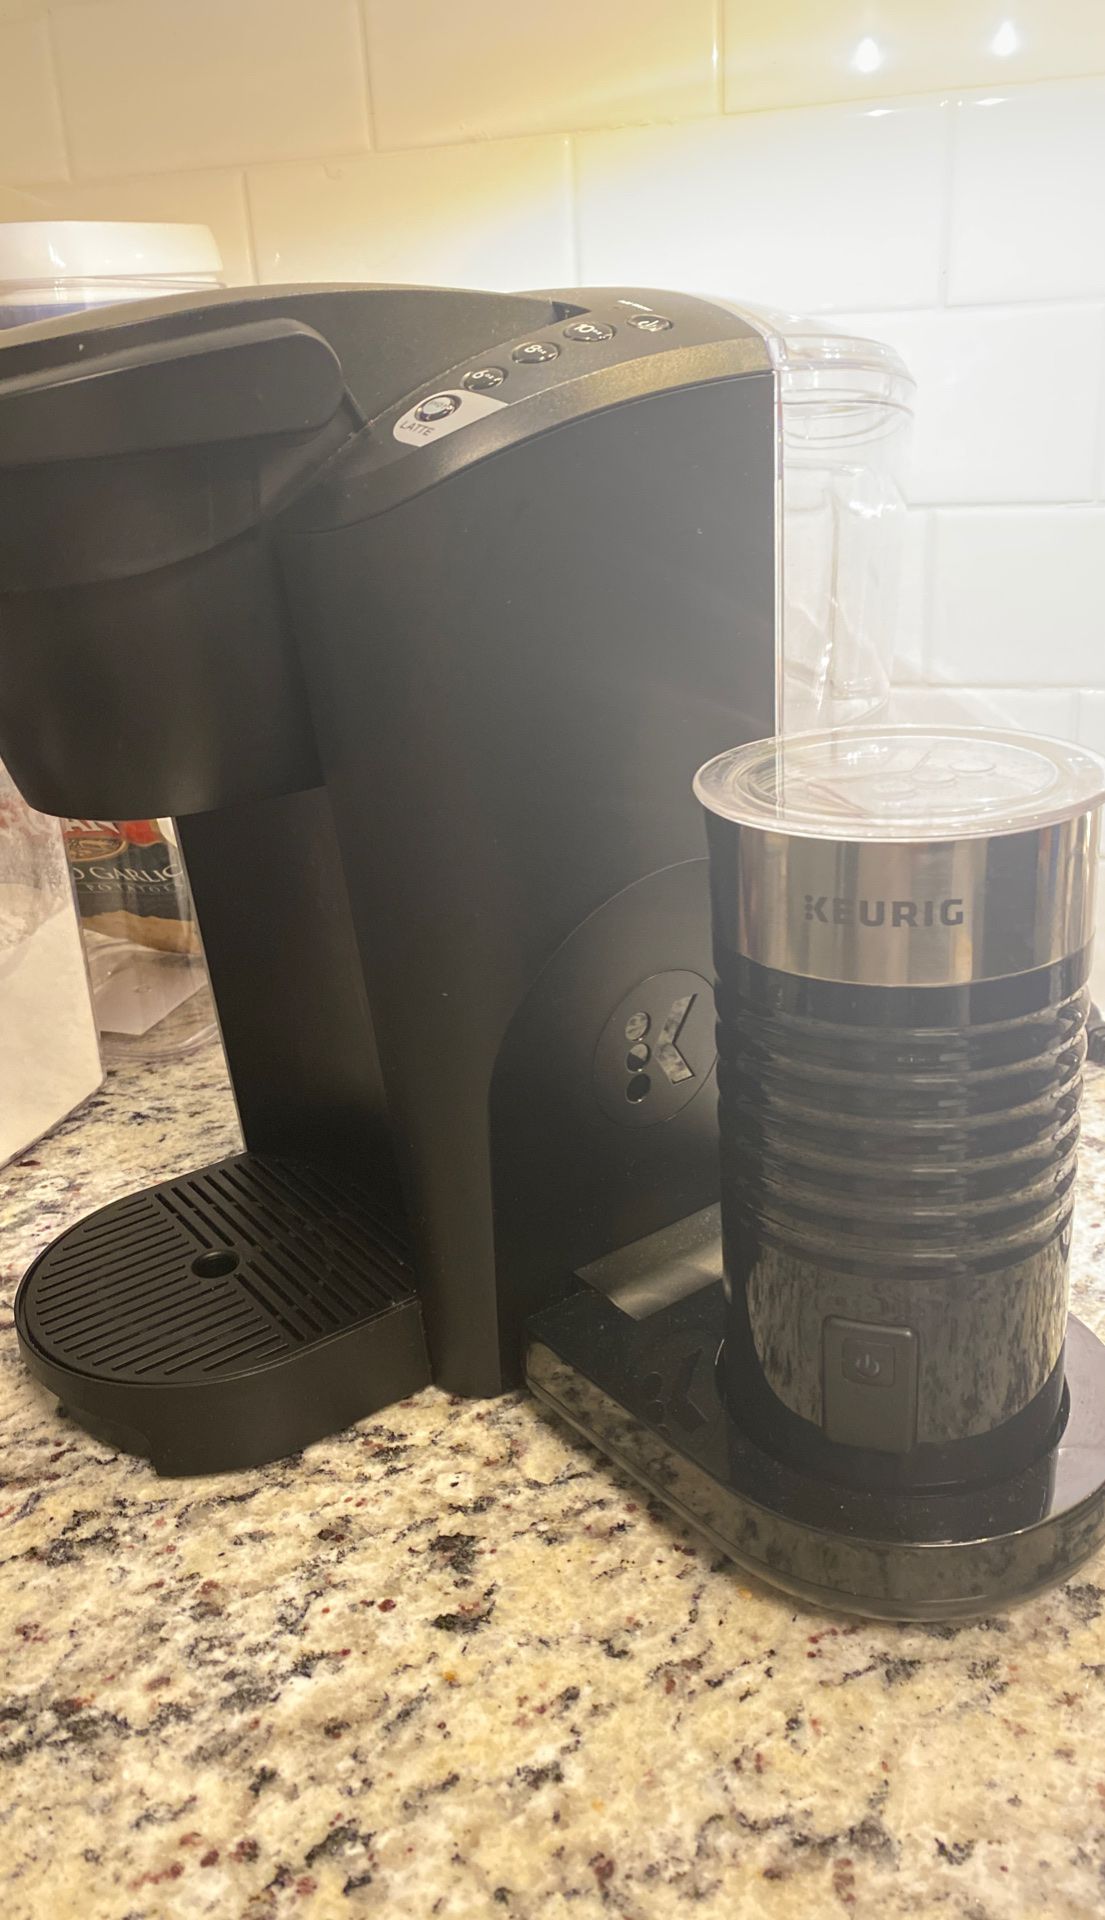 Keurig coffee maker with frother (K Latte)